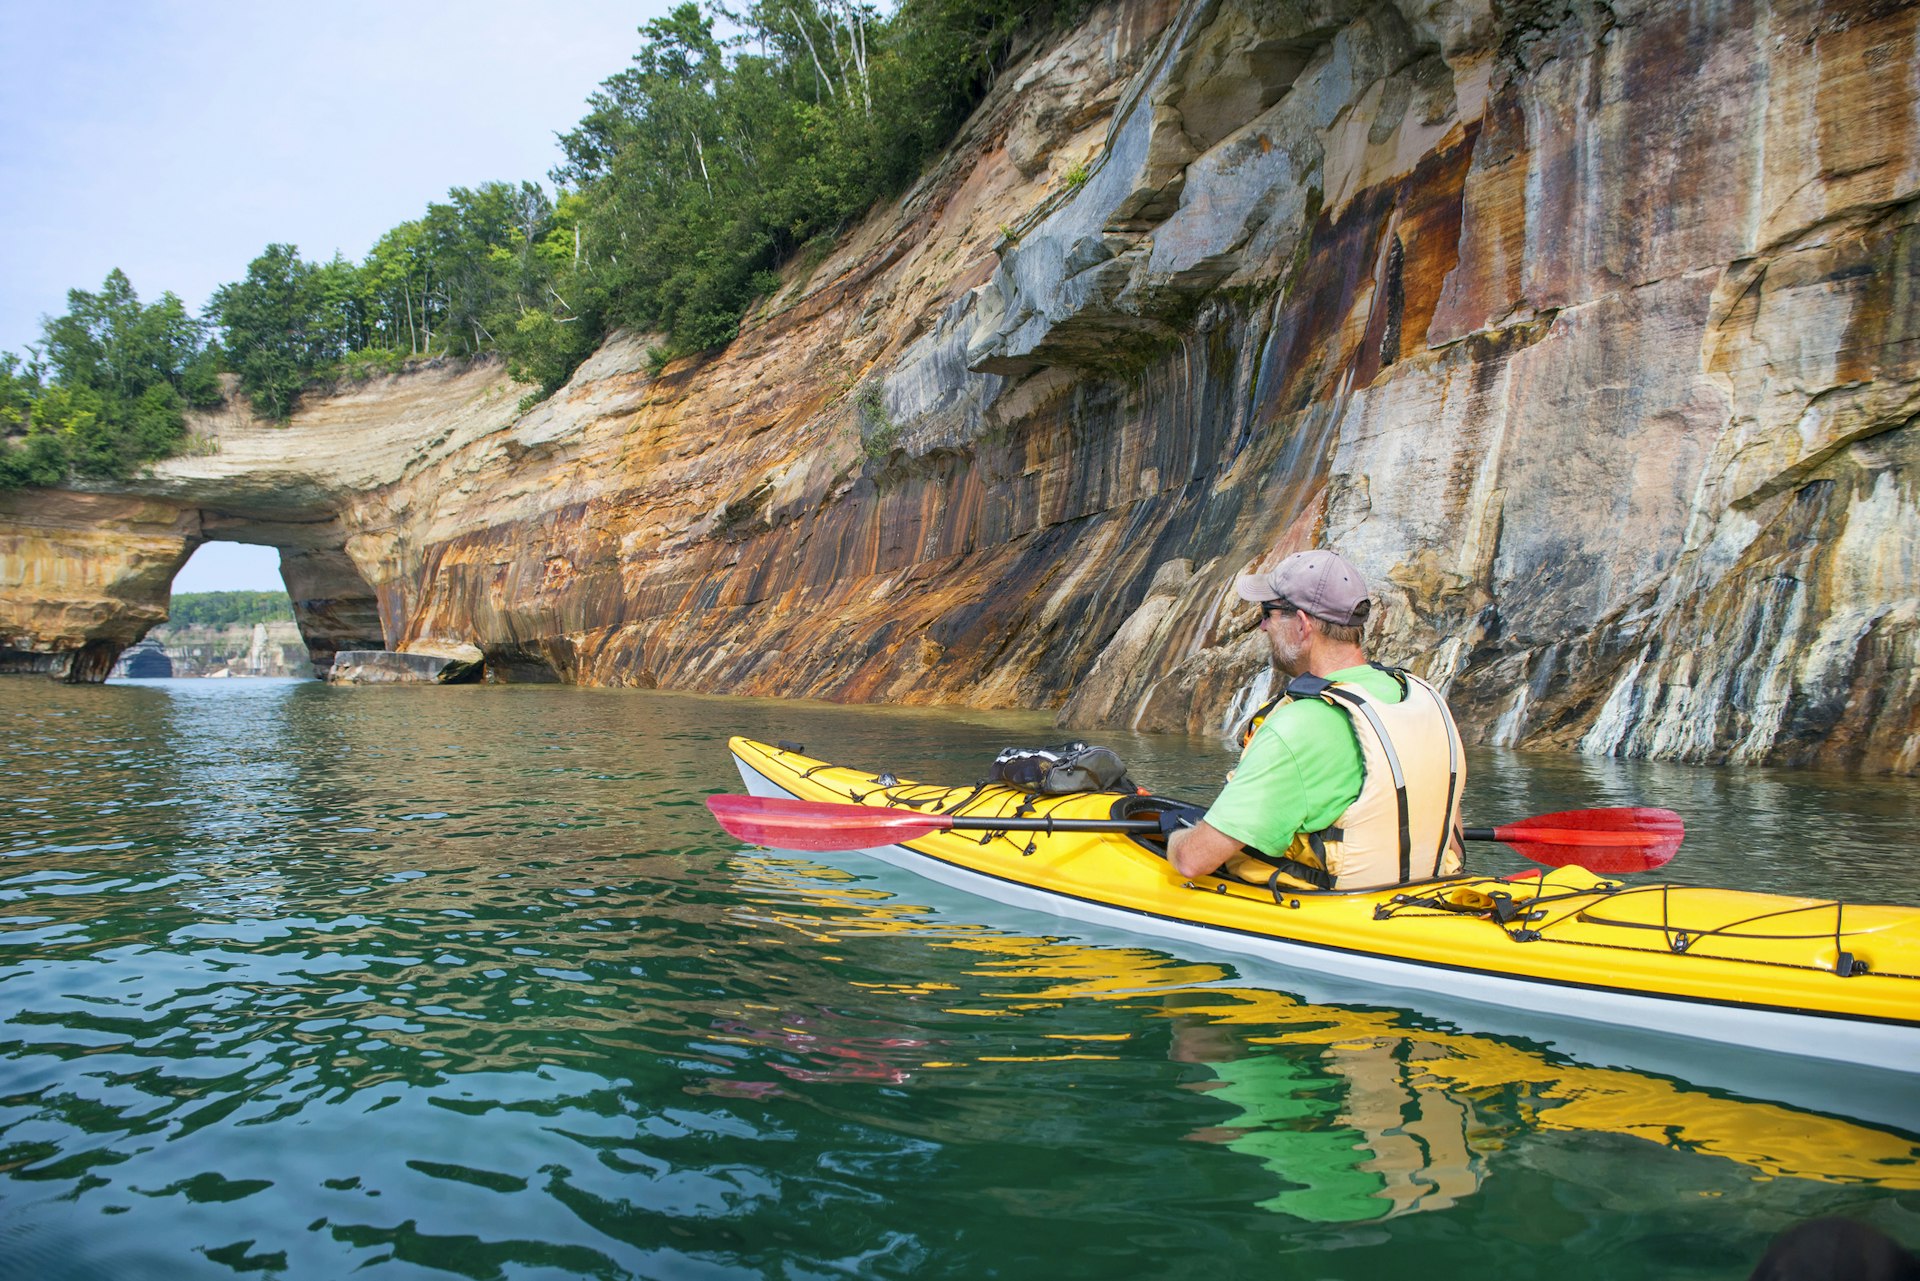 sea kayaker headed towards an arched rock along the Pictured Rocks National Lakeshore near Munising, Michigan